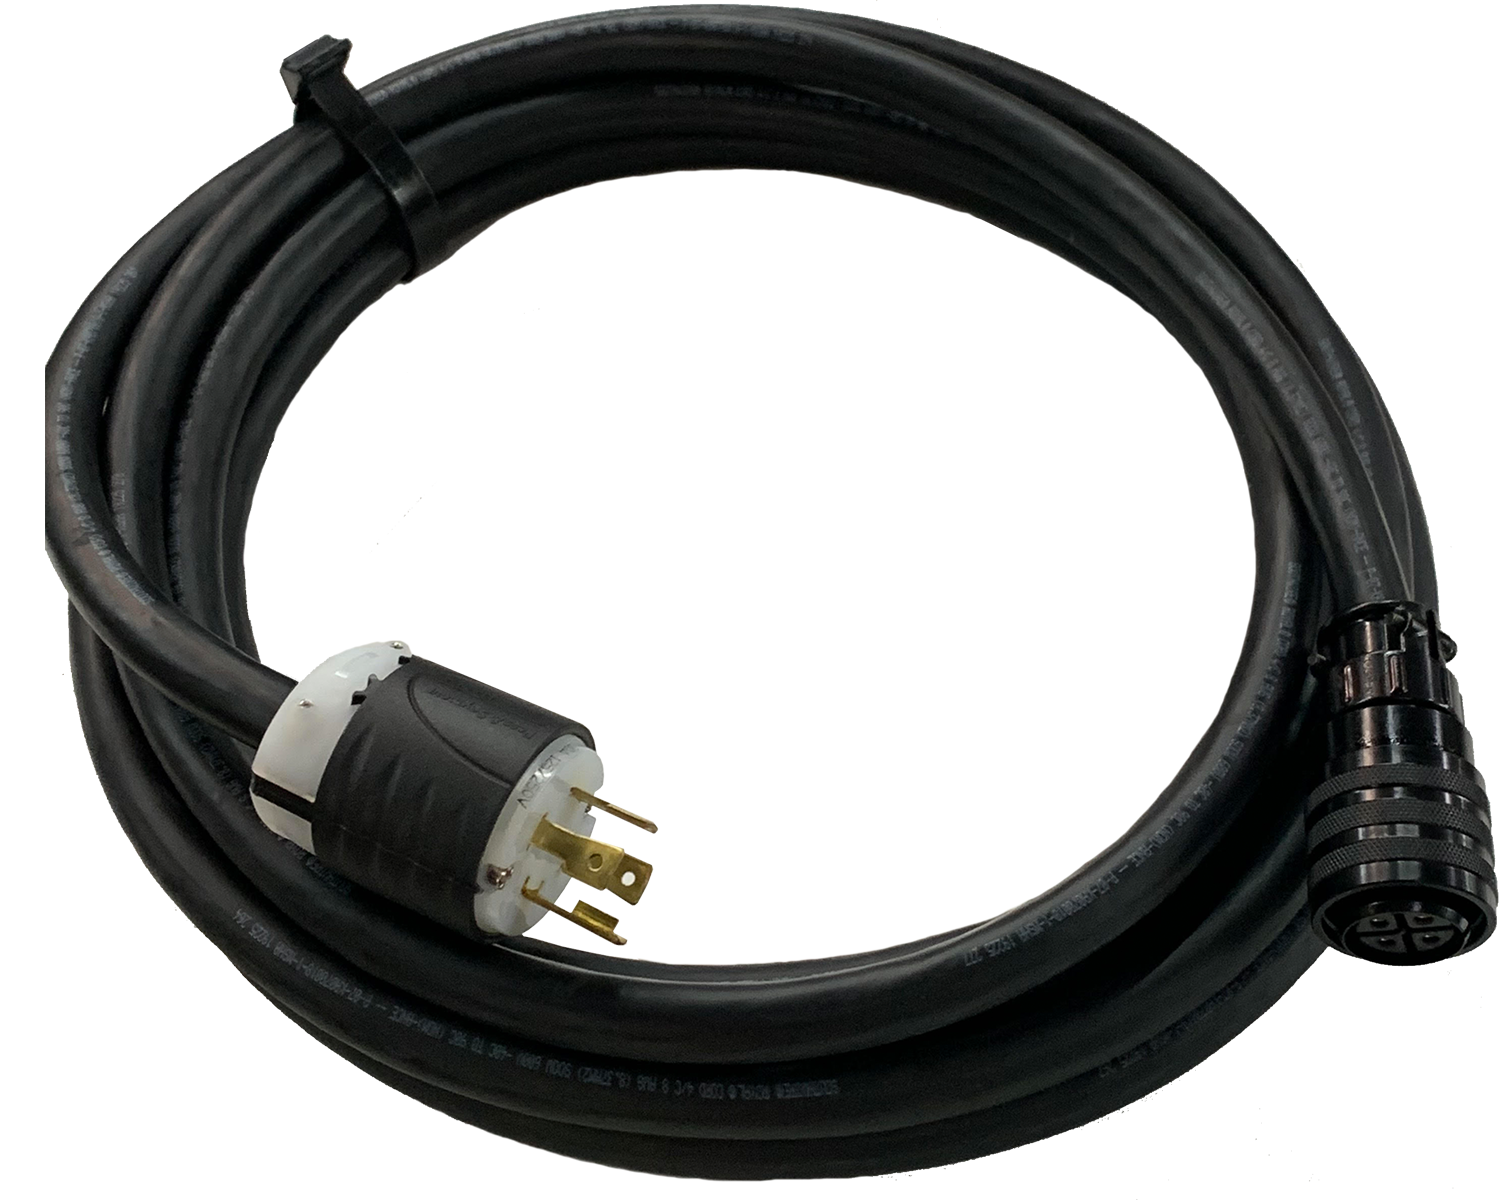 GenerLink 100 Cord with 14-50 Plug (unit not included)